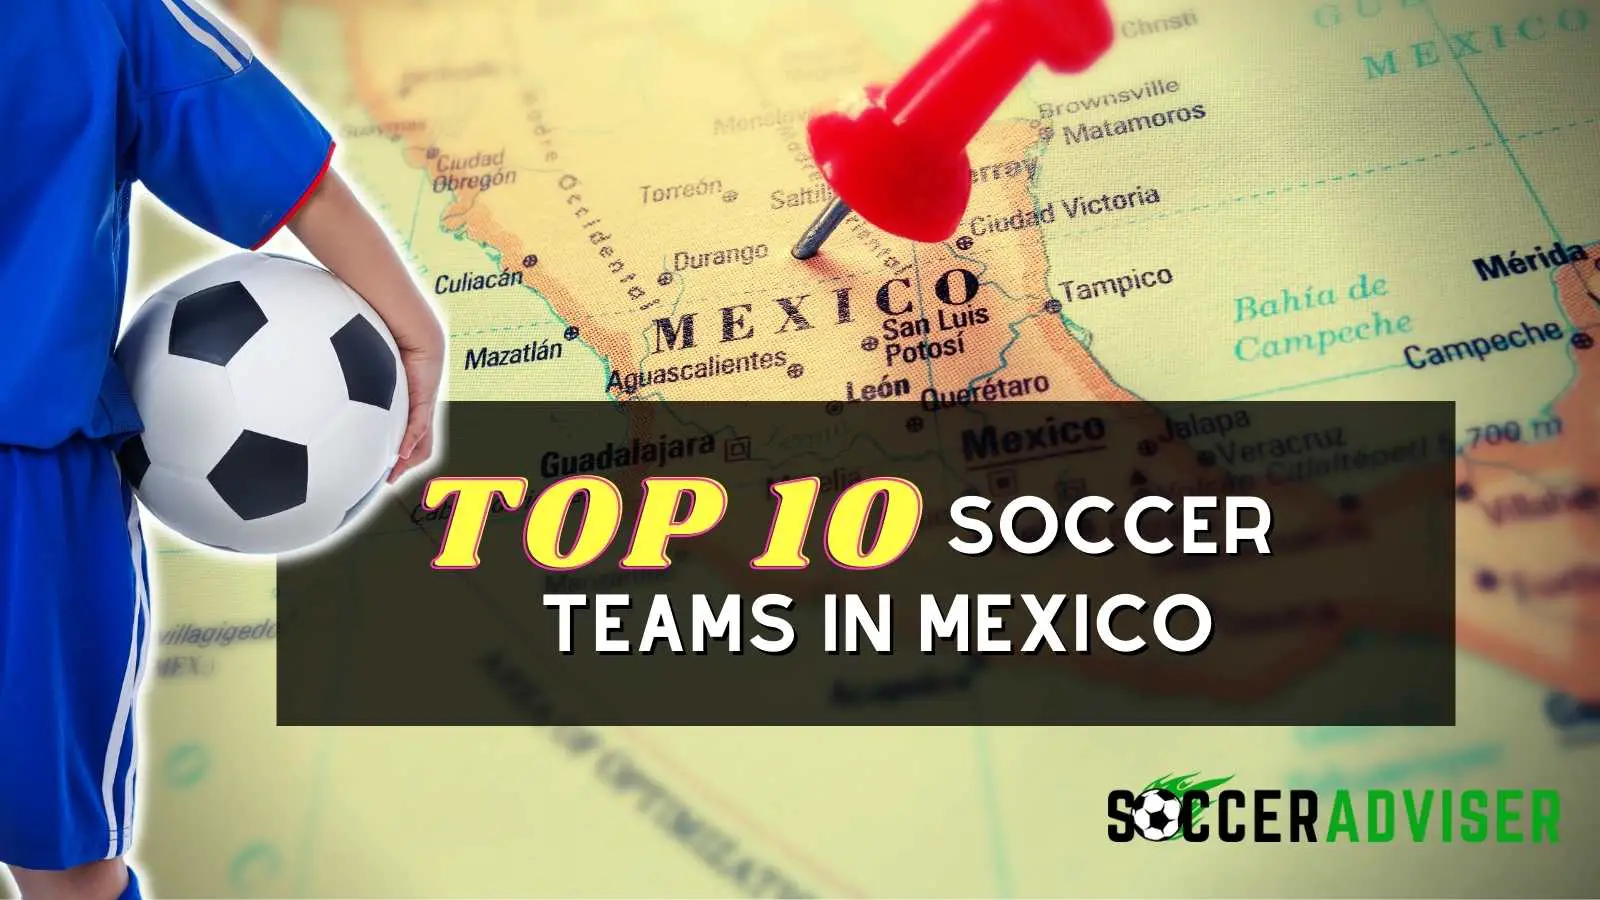 Top 10 Soccer Teams In Mexico (Check These Out!)